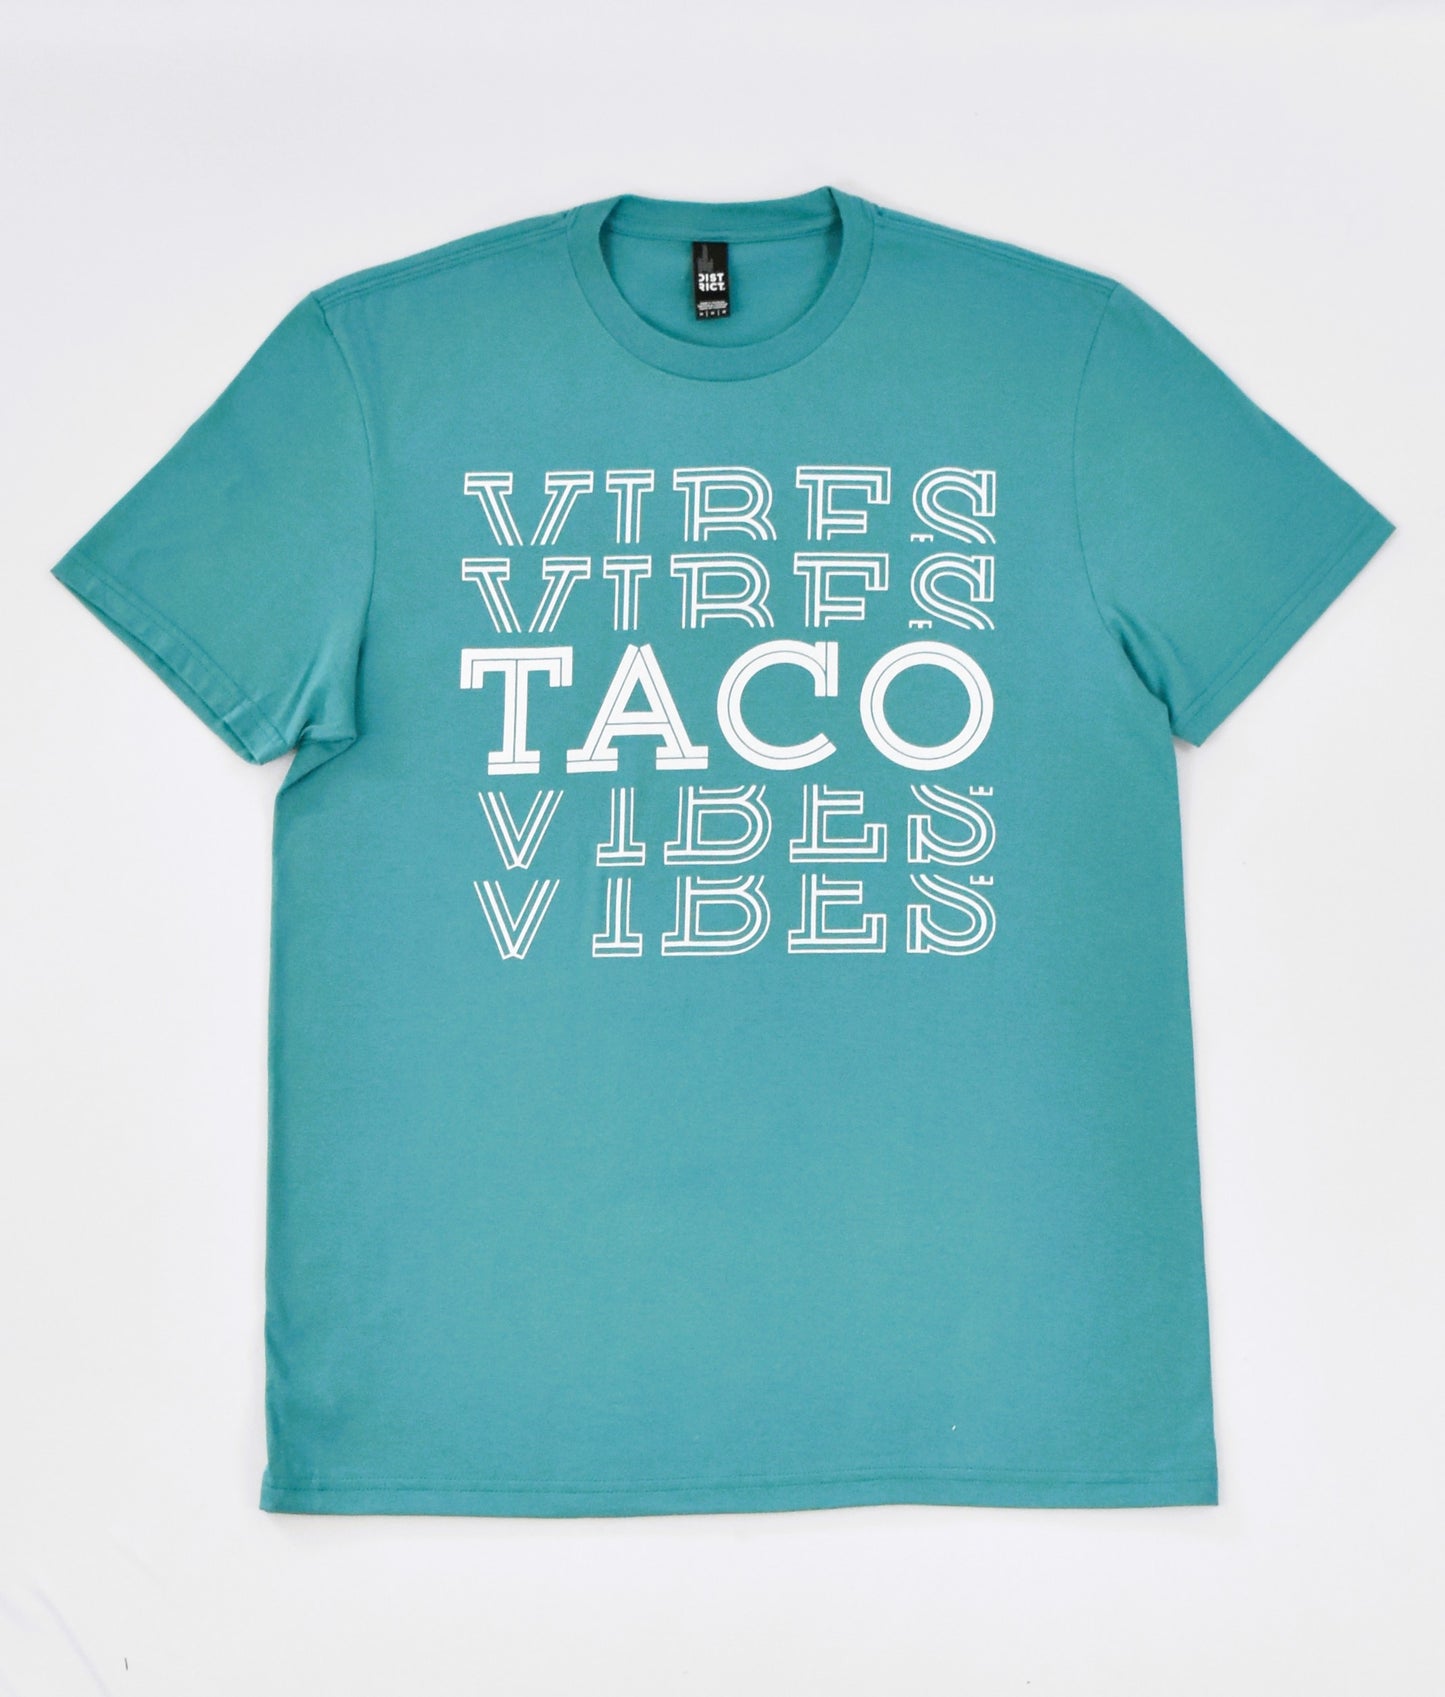 Taco Vibes T-Shirt - 10 MEALion challenge